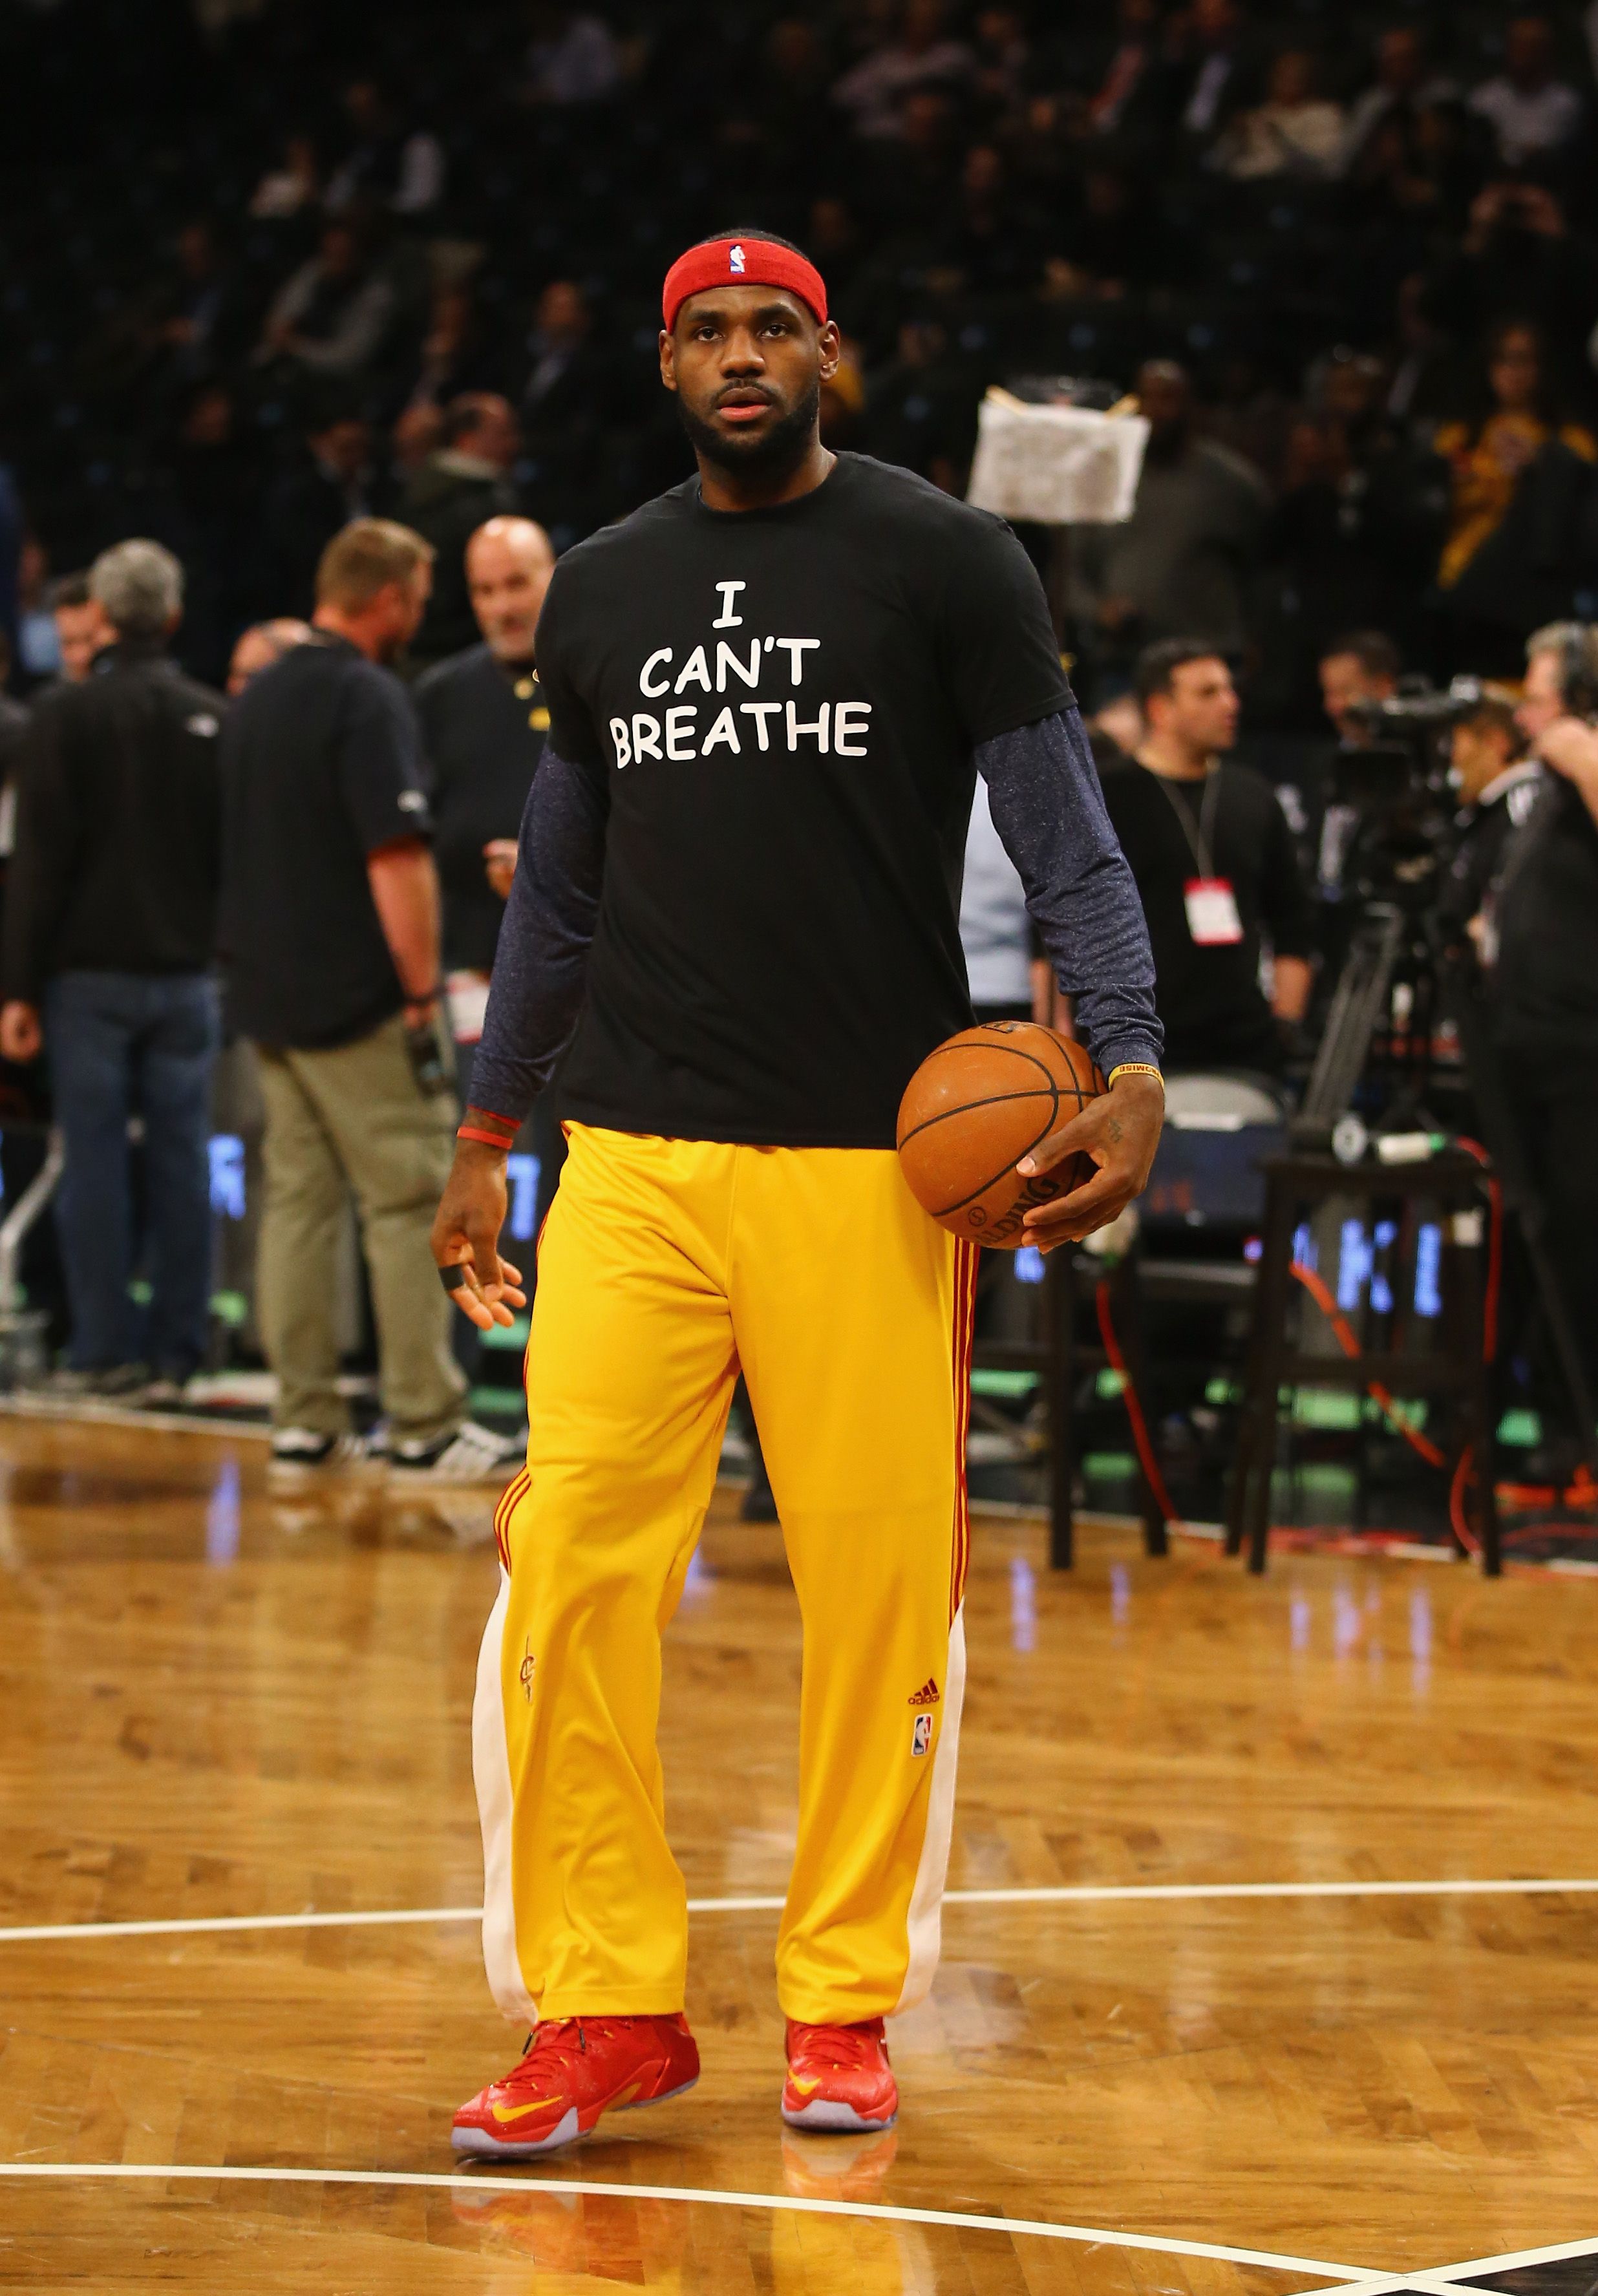 LeBron James sports an "I Can't Breathe" shirt during his game against the Brooklyn Nets at the Barclays Center on December 8, 2014 in New York City. | Source: Getty Images